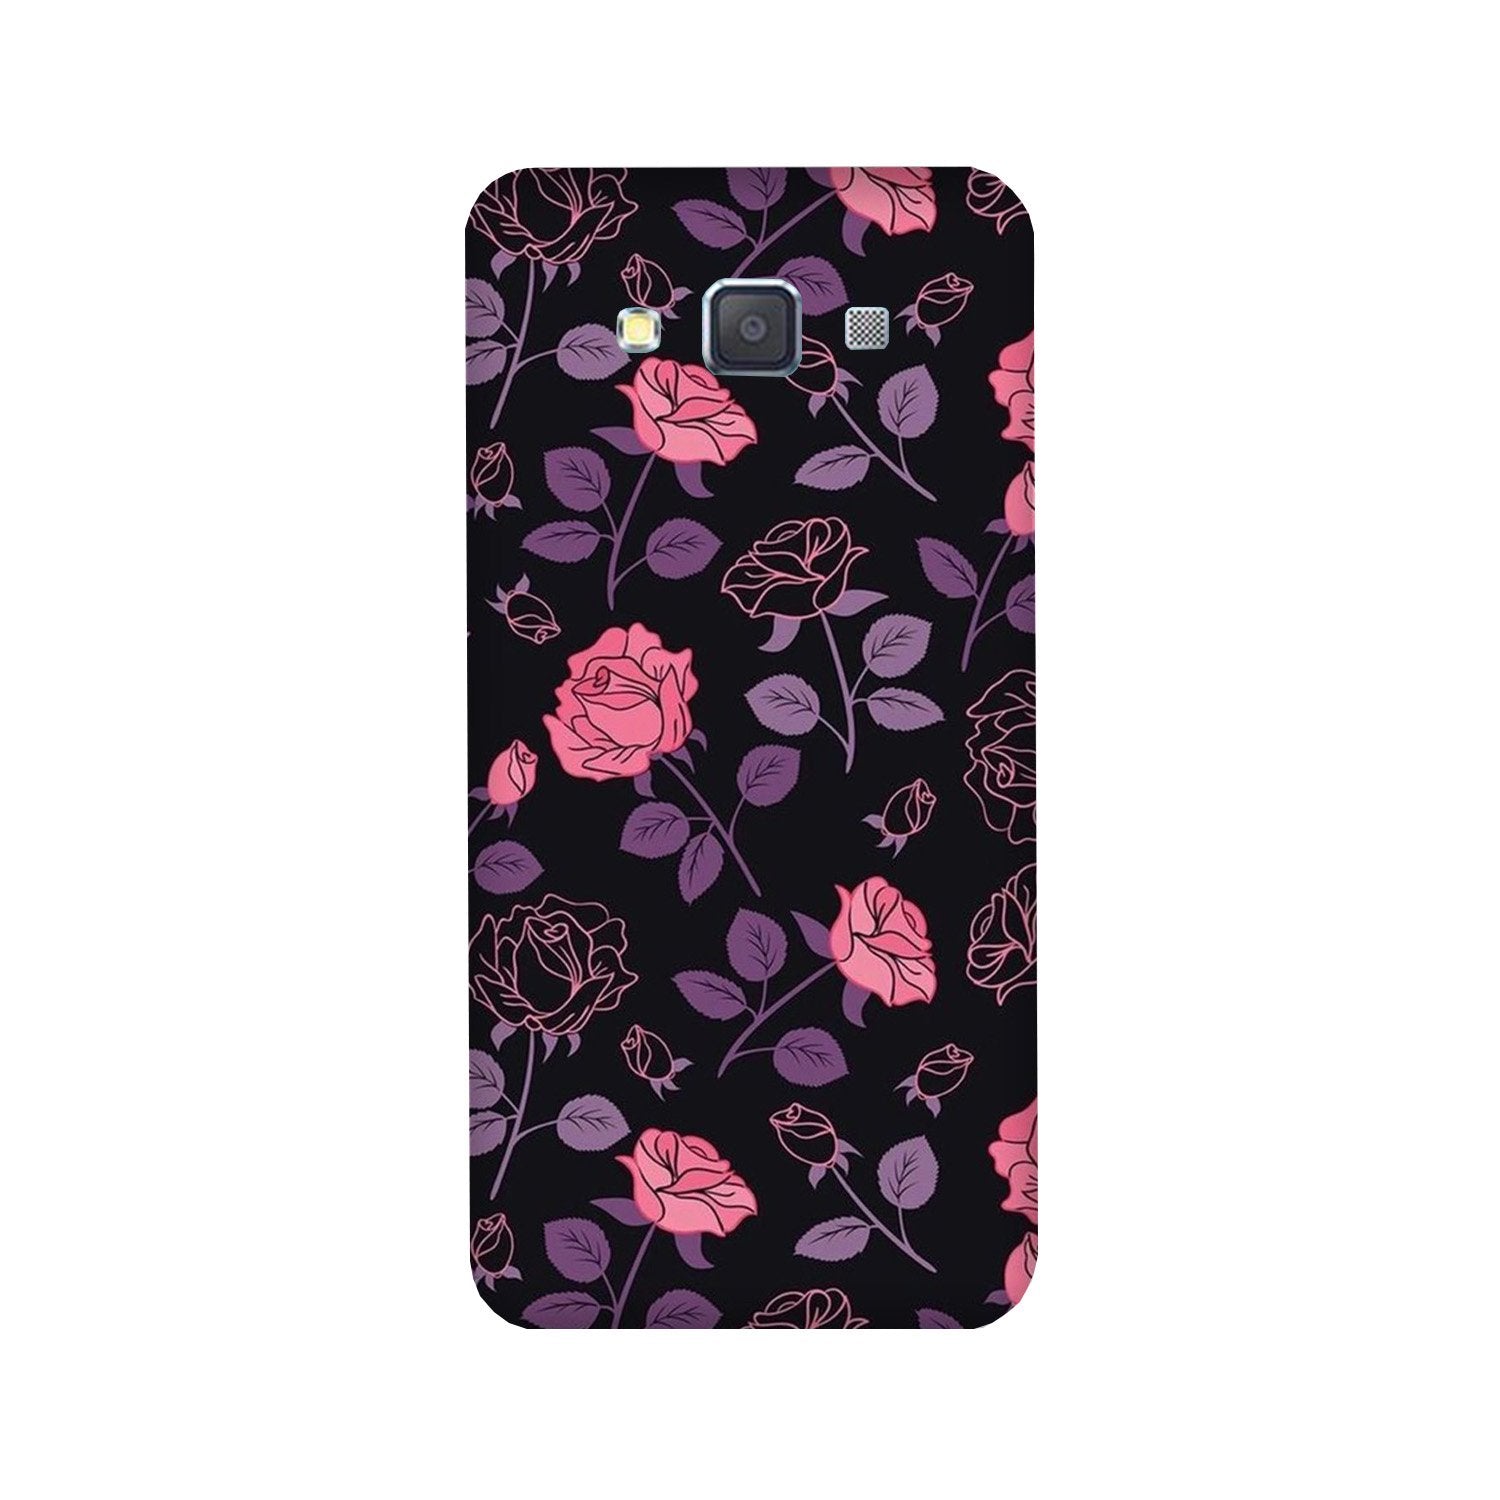 Rose Pattern Case for Galaxy Grand Prime